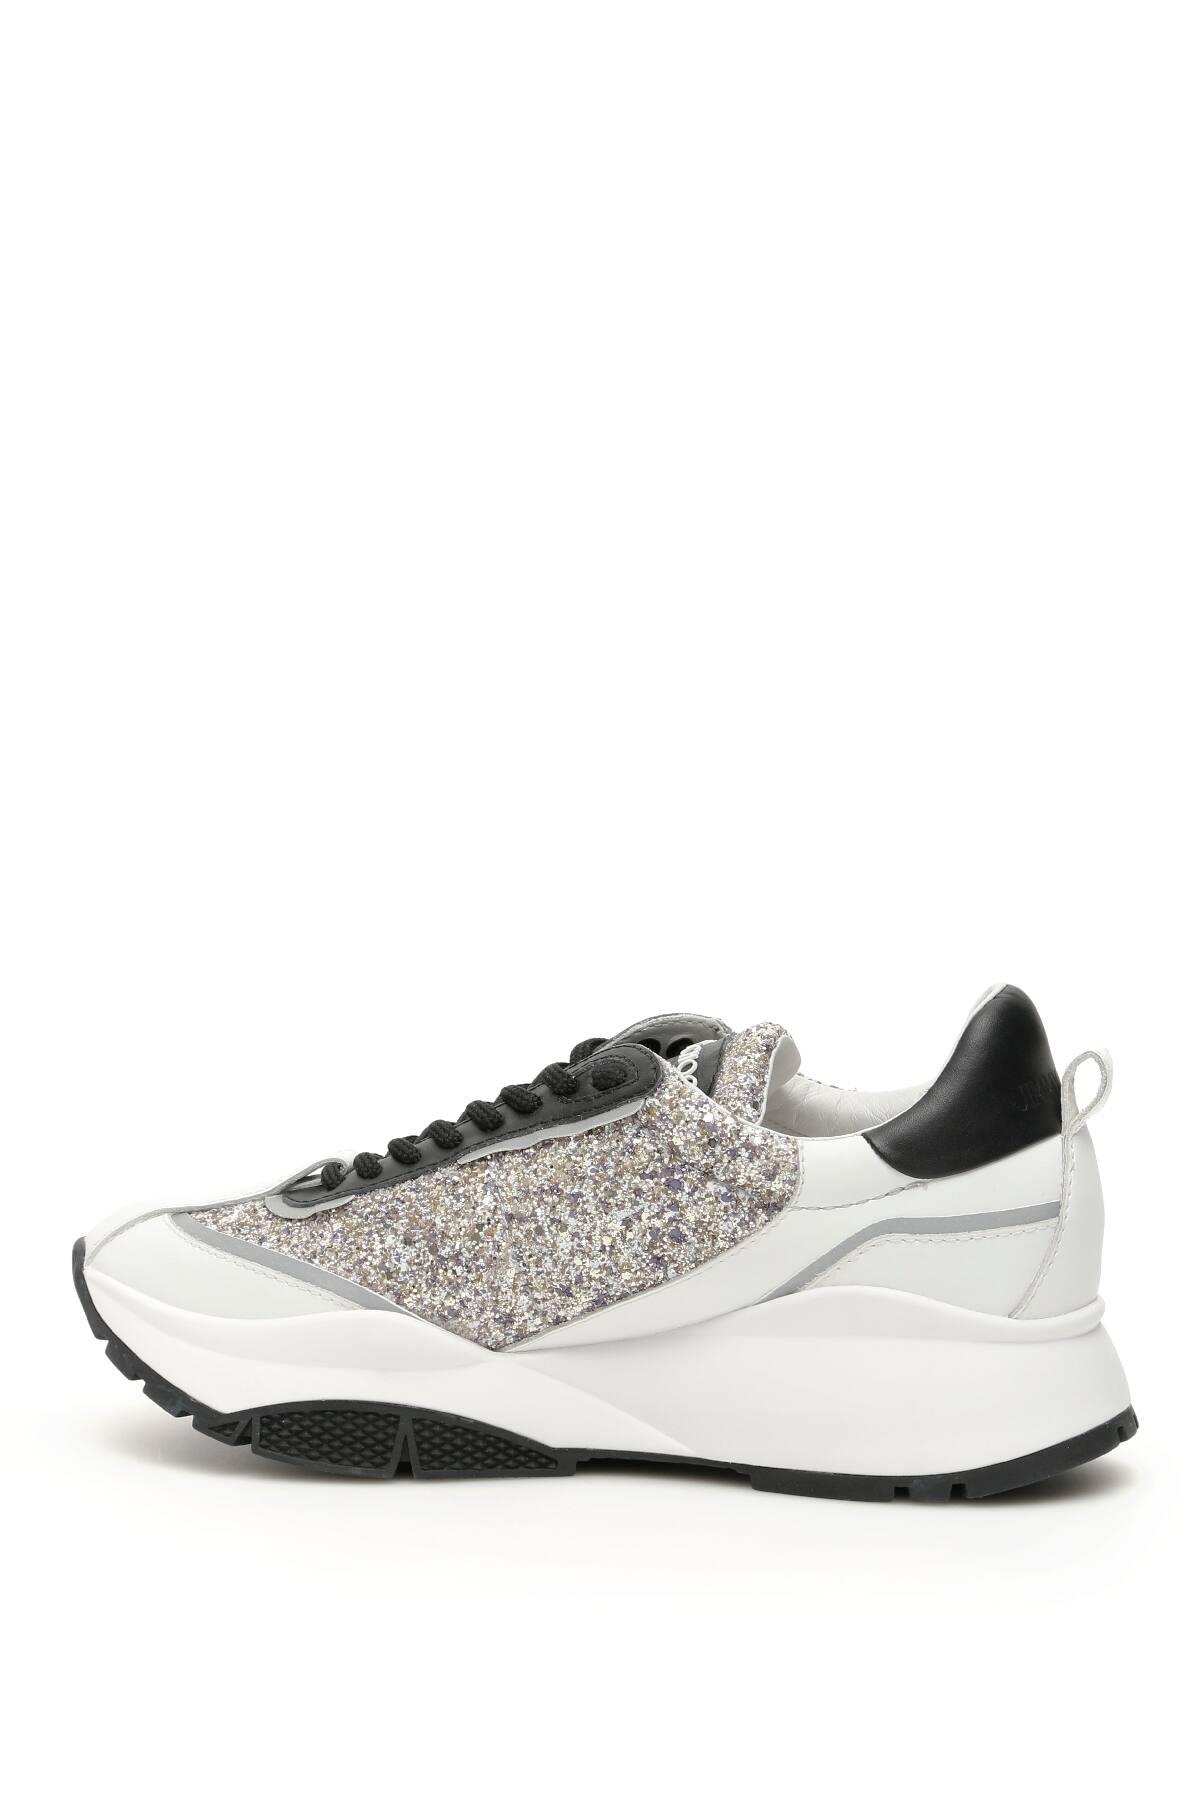 Jimmy Choo Leather Raine Sneakers in White,Black,Silver (White) - Lyst